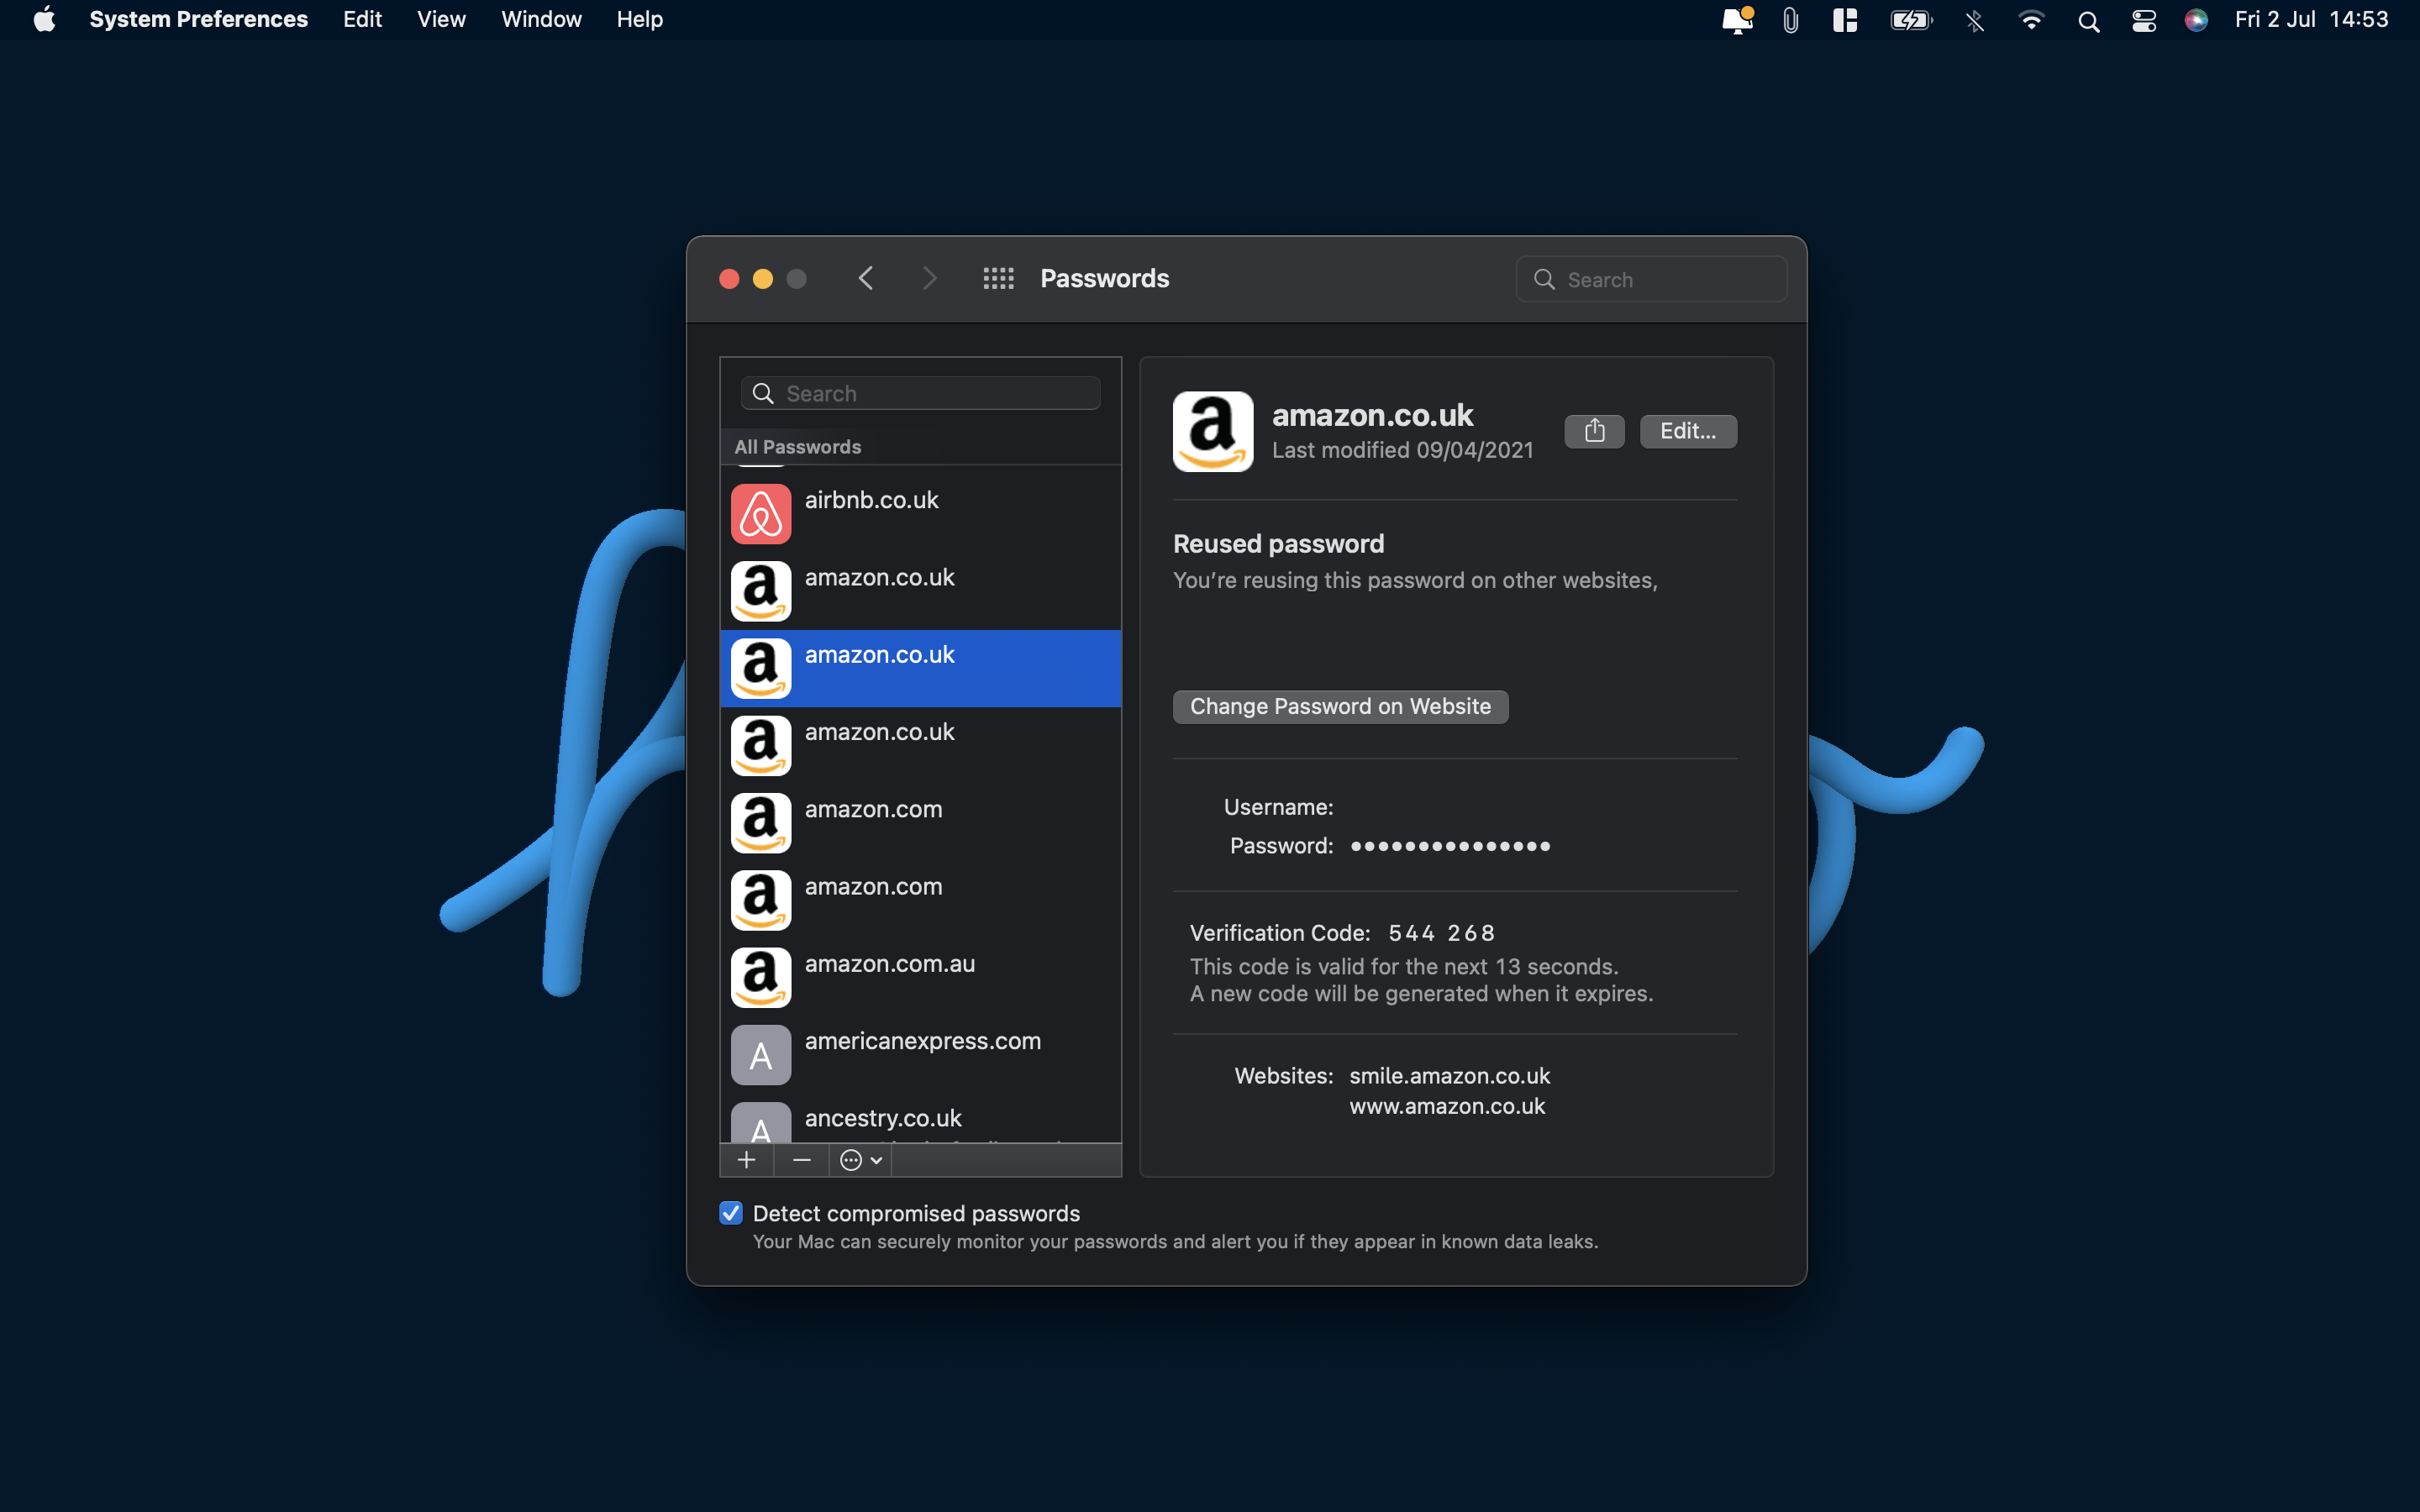 An example of accessing Apple's authenticator on macOS.